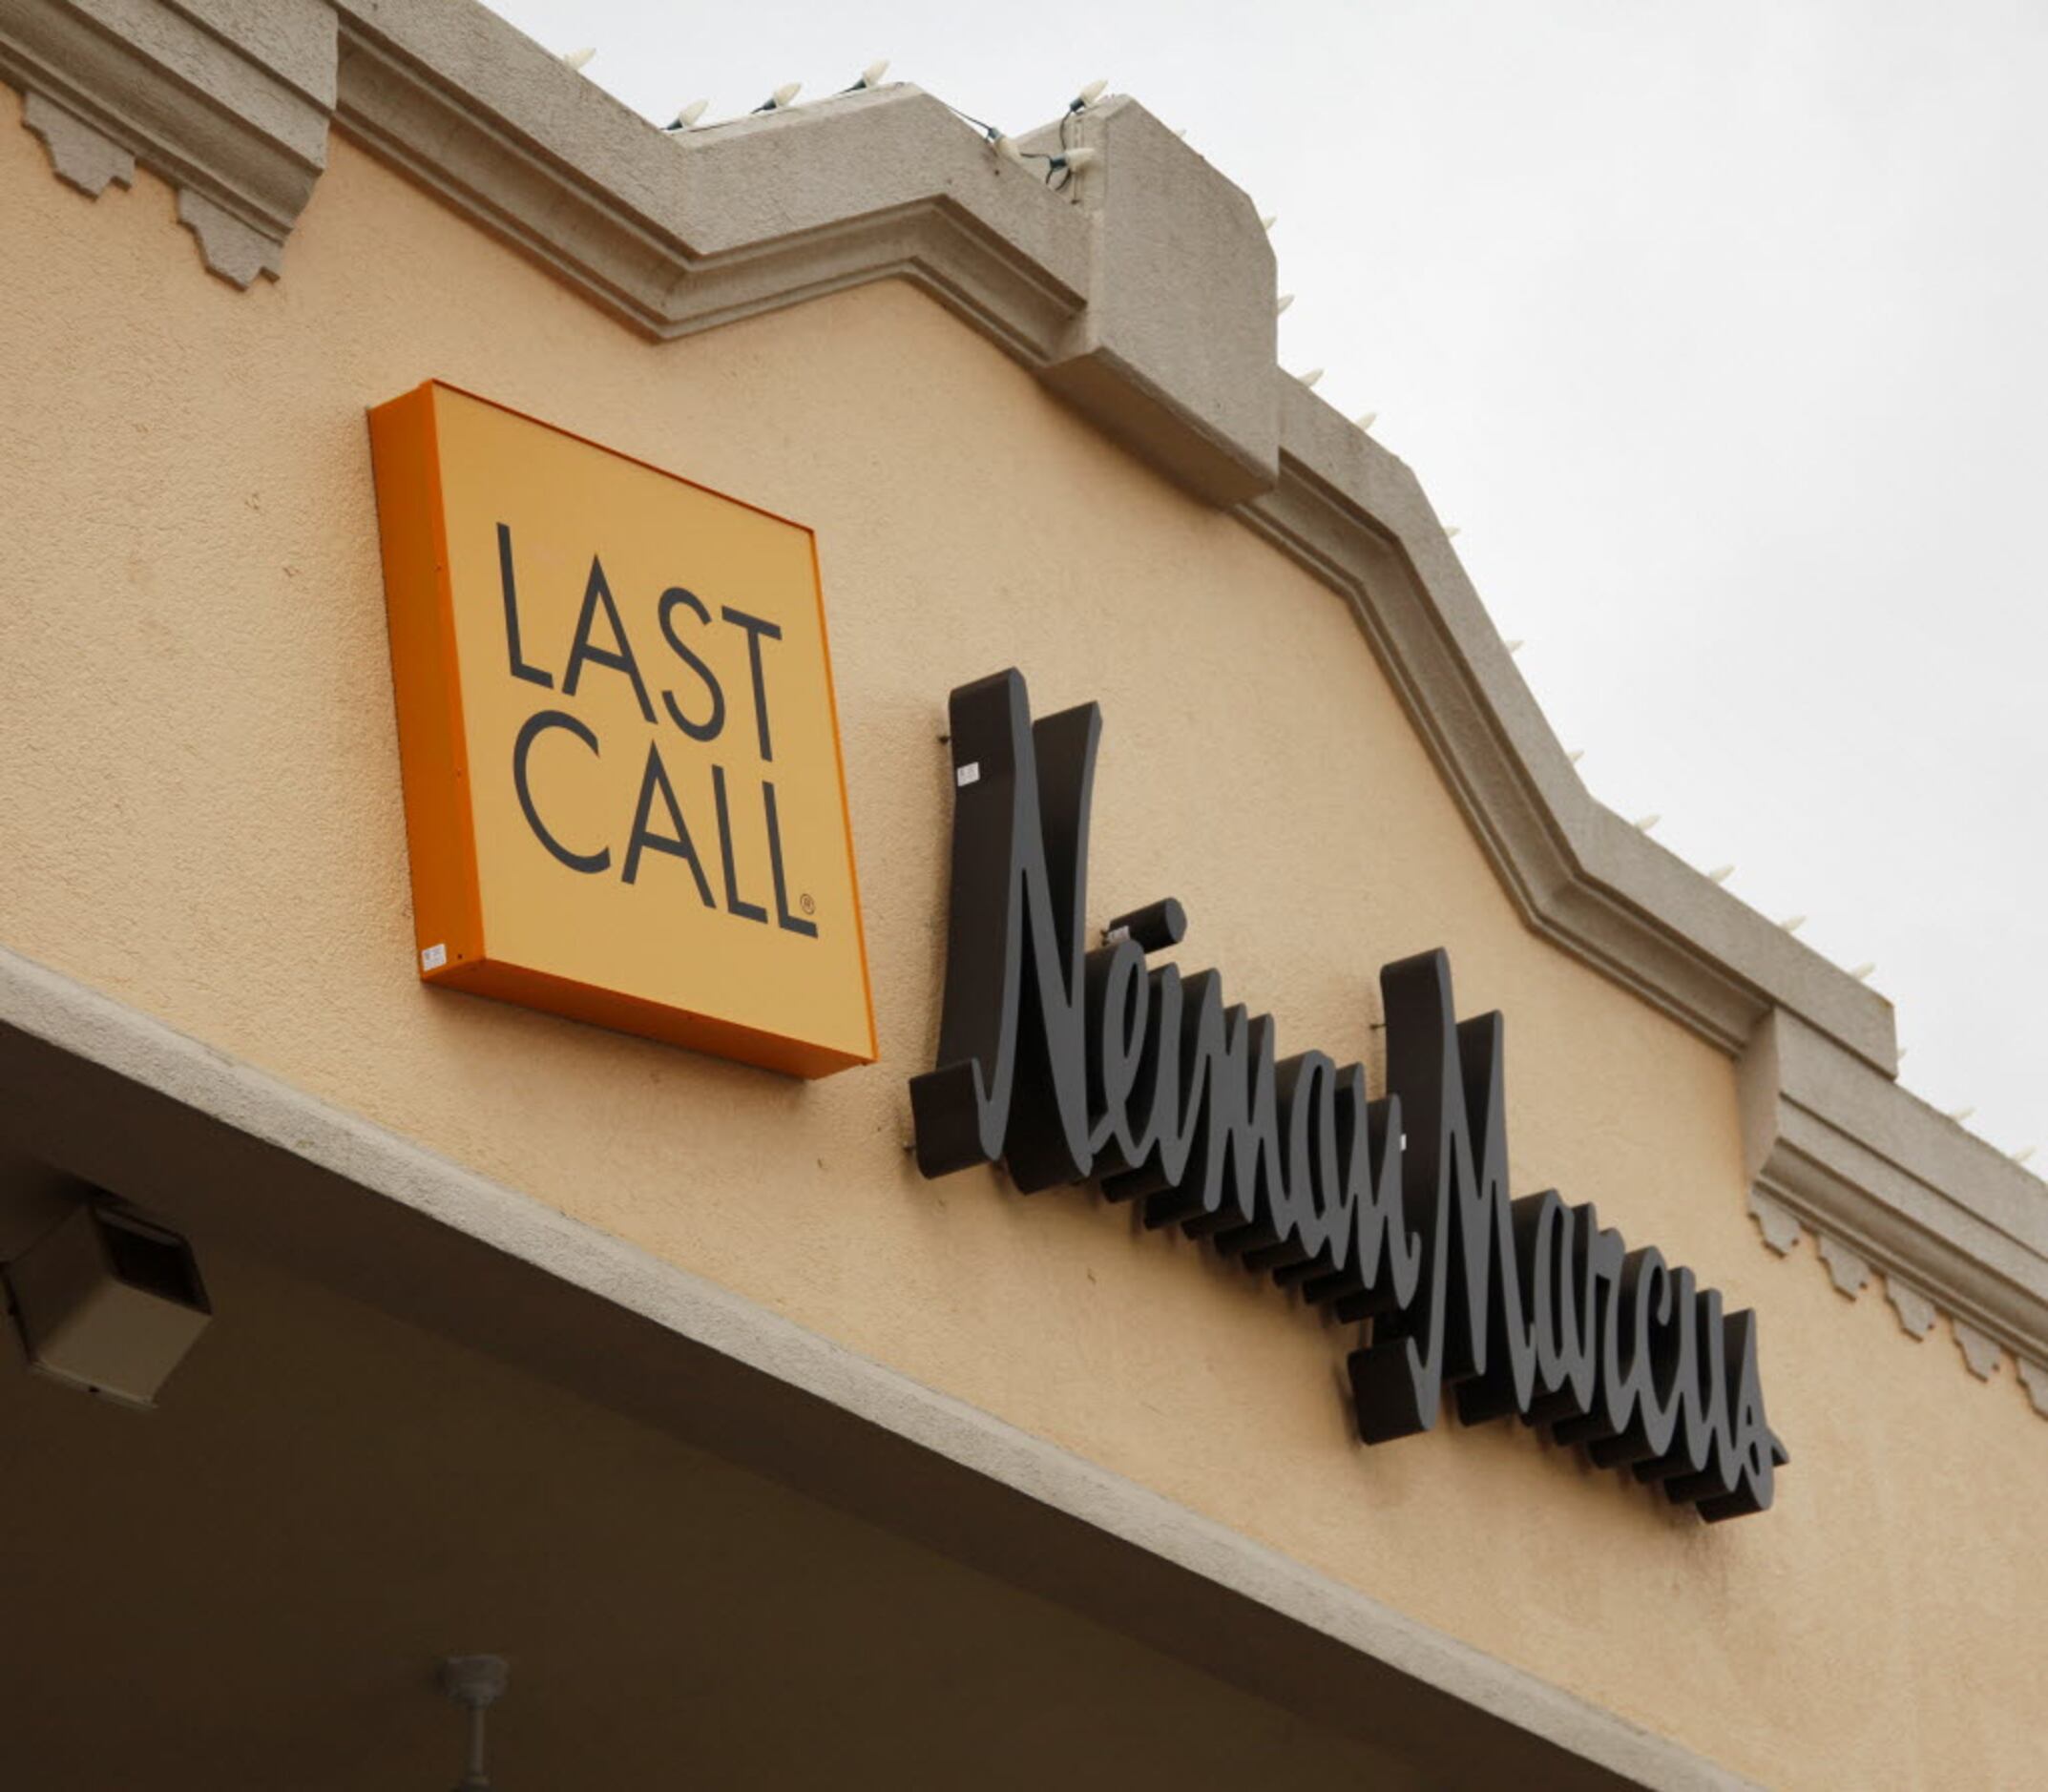 Neiman Marcus is closing down its Last Call business to focus on full-price  luxury selling